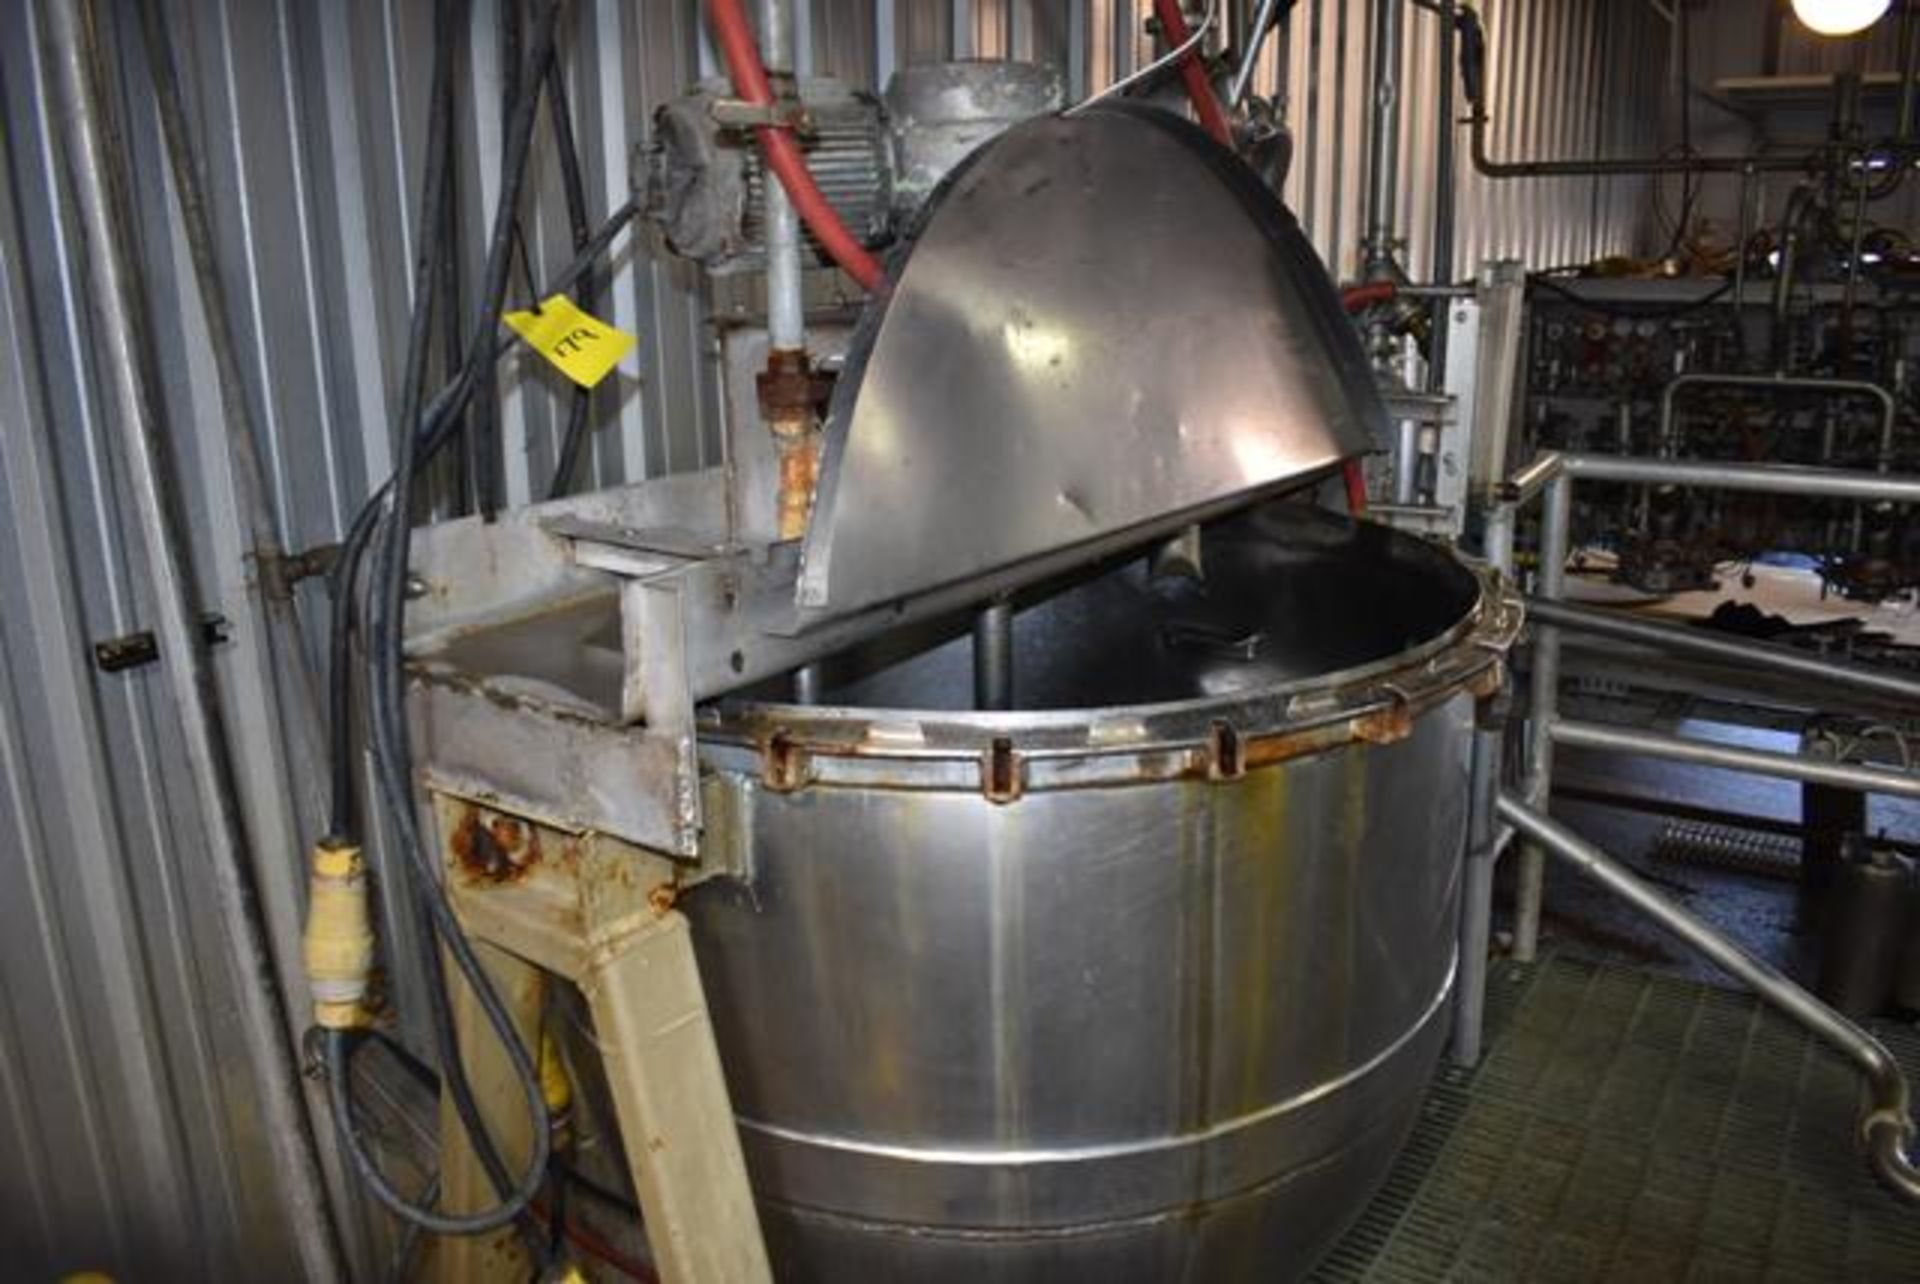 Lee Ind. SS Kettle, Rated 300 Gal., 48" x 48", Includes Mixer, Motor & Pump